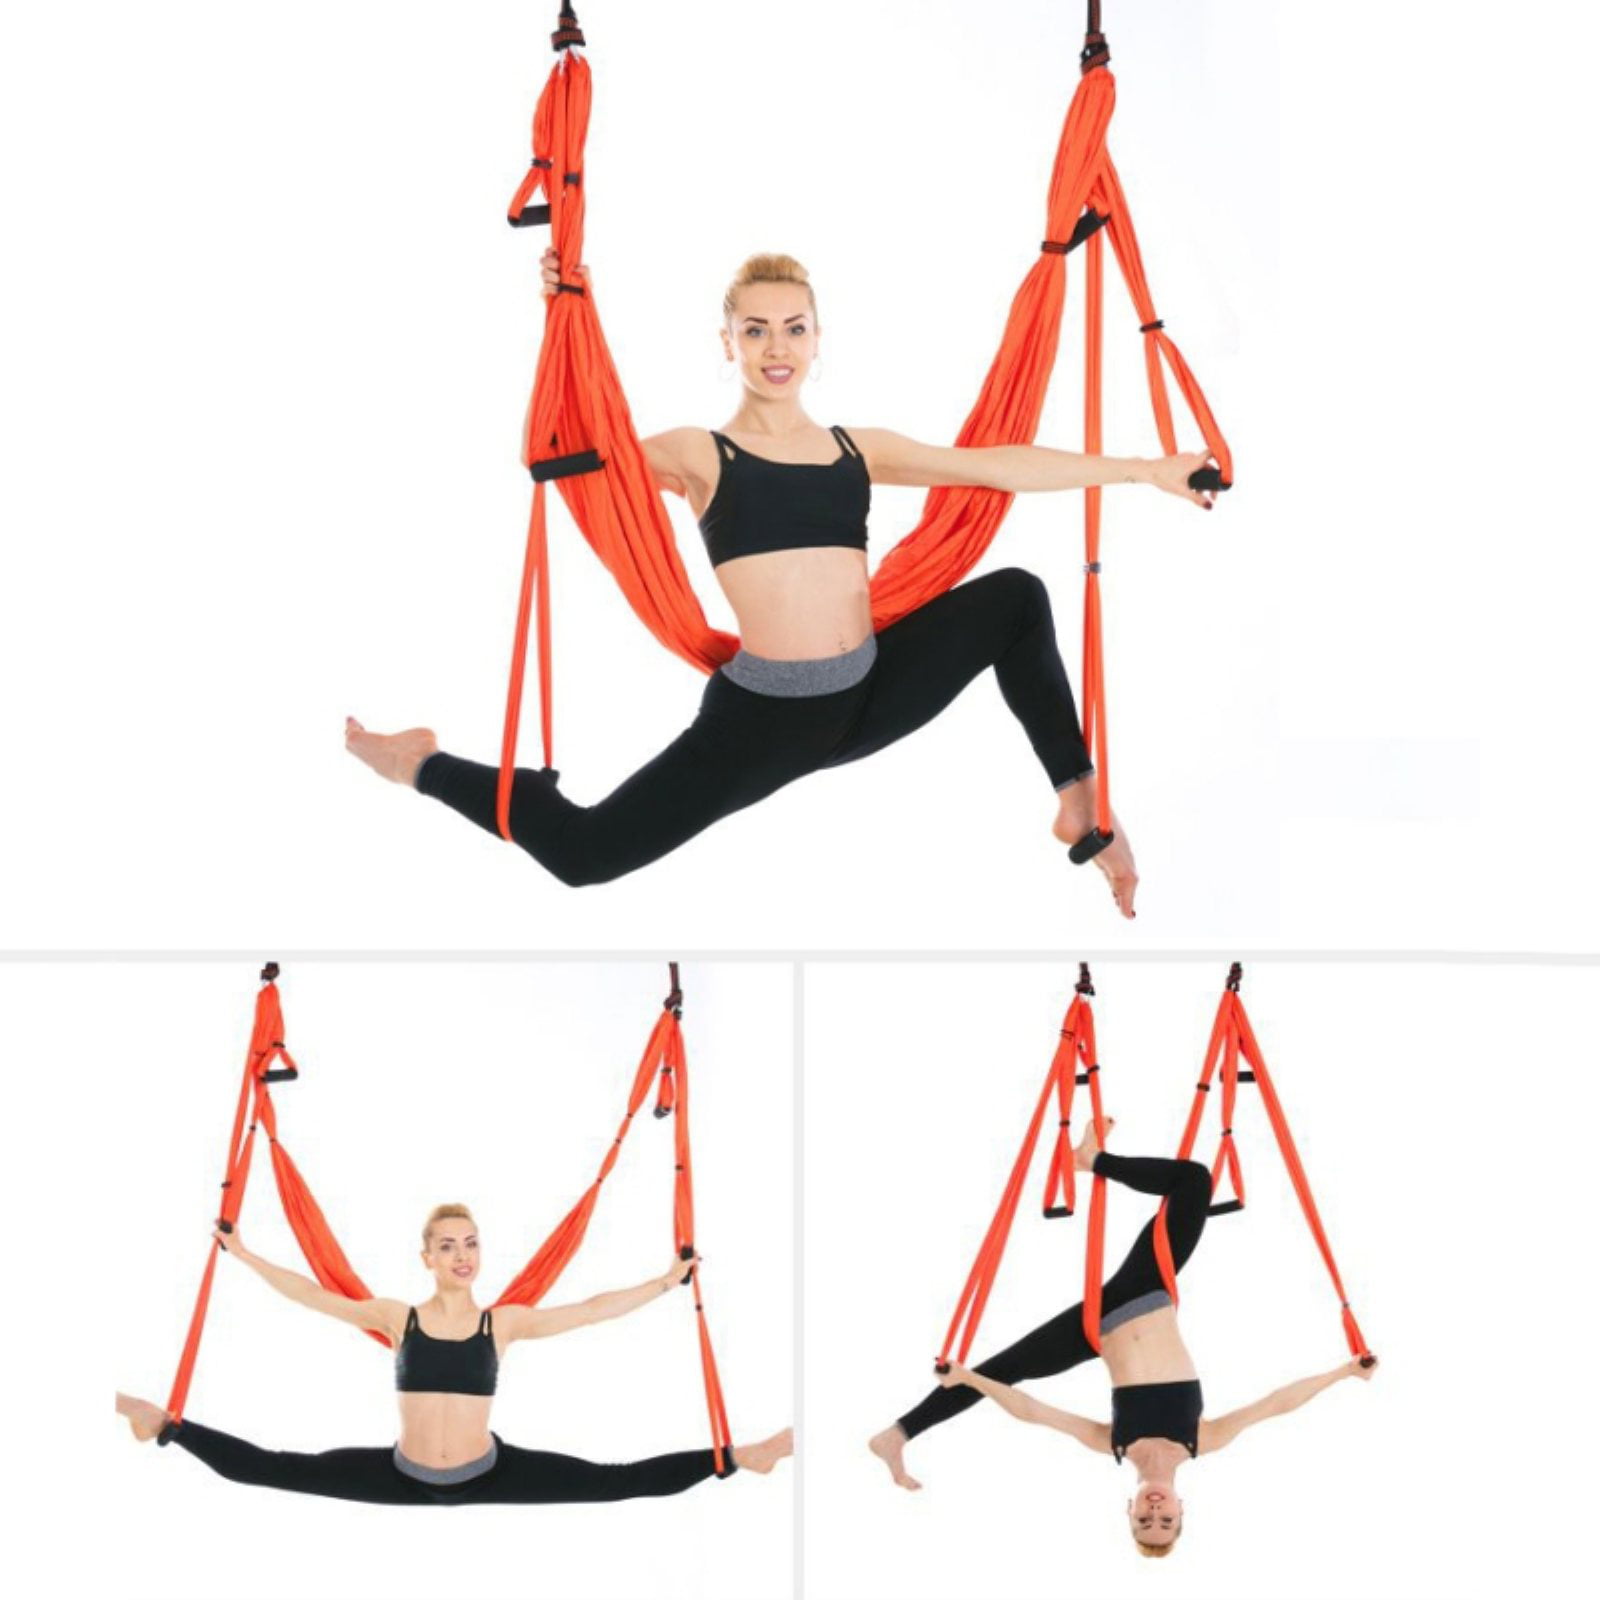 Details about   Yoga Hammock Swing Sling Props Aerial Silks Anti-gravity Inversion Fitness Gym 